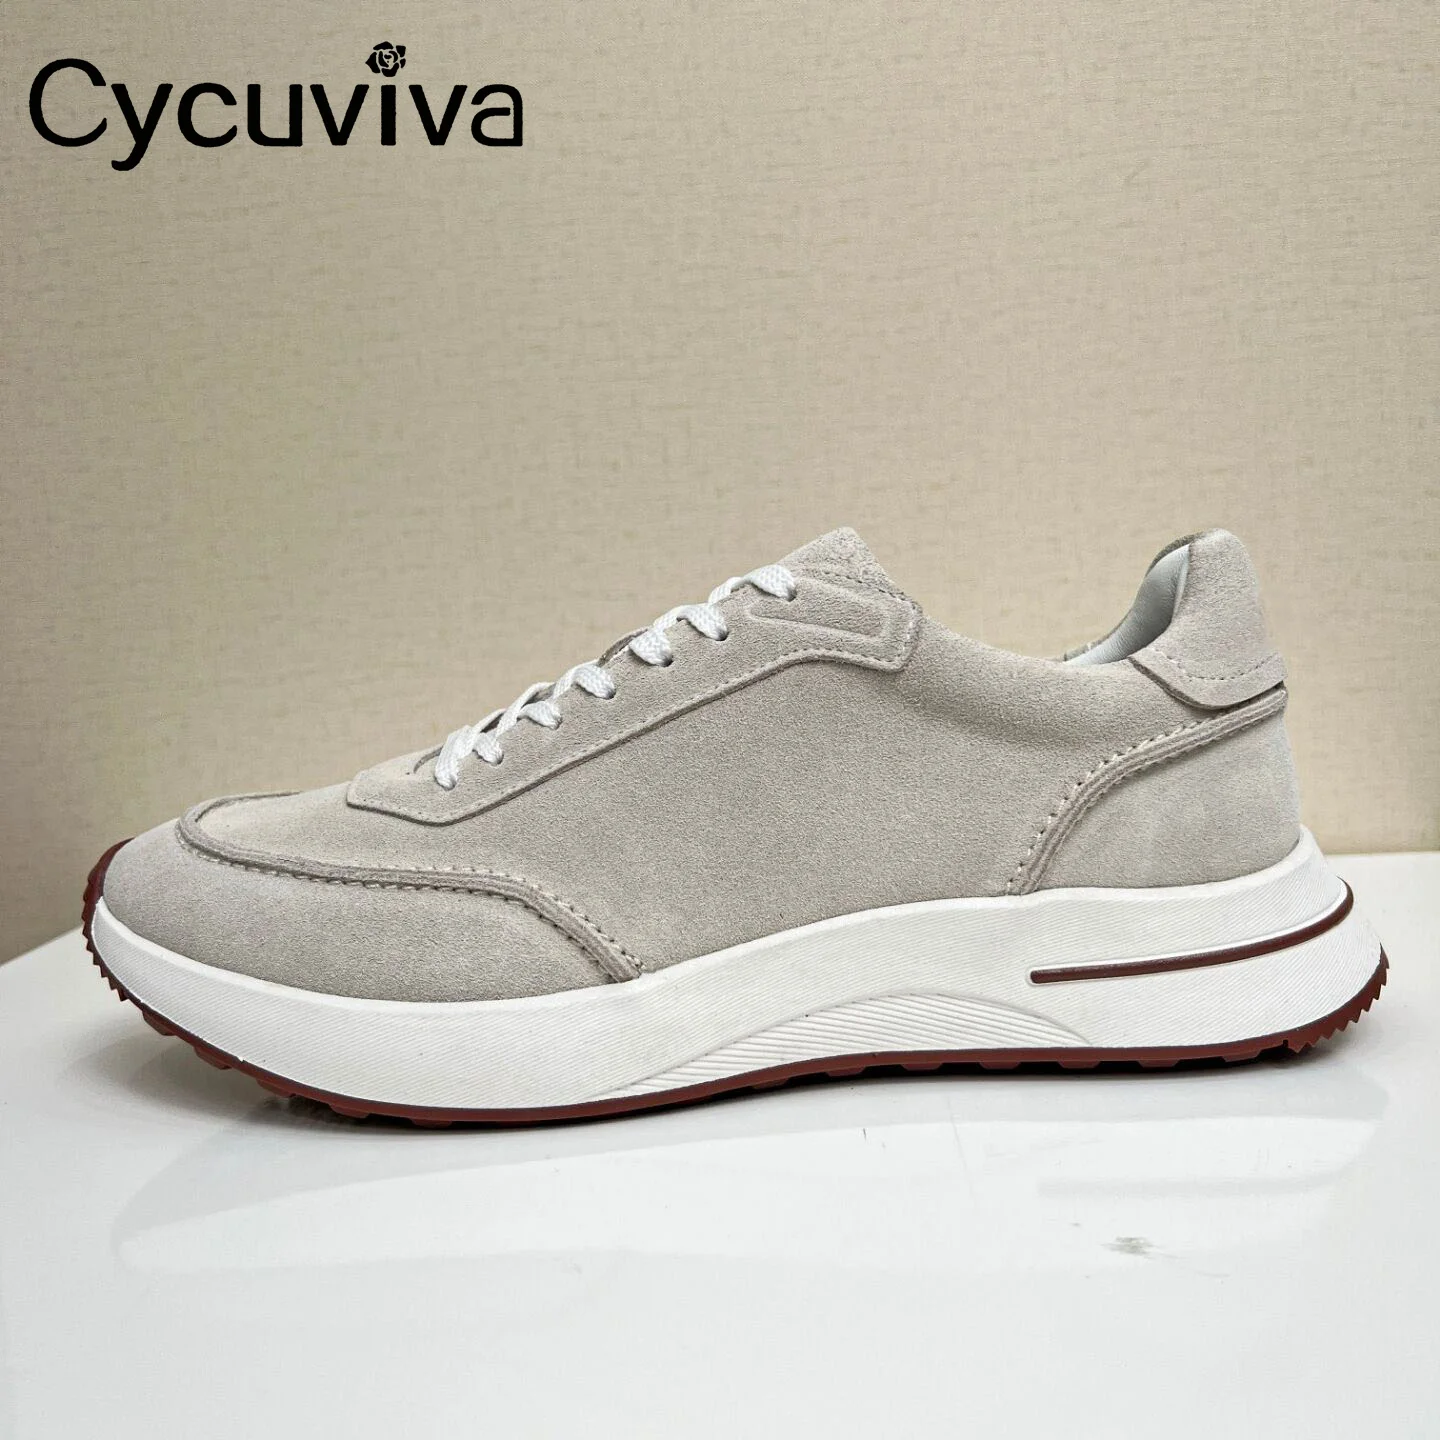 Hot Platform Lace Up Sneakers Men Spring Suede Leather Flat Casual Shoes... - $230.72